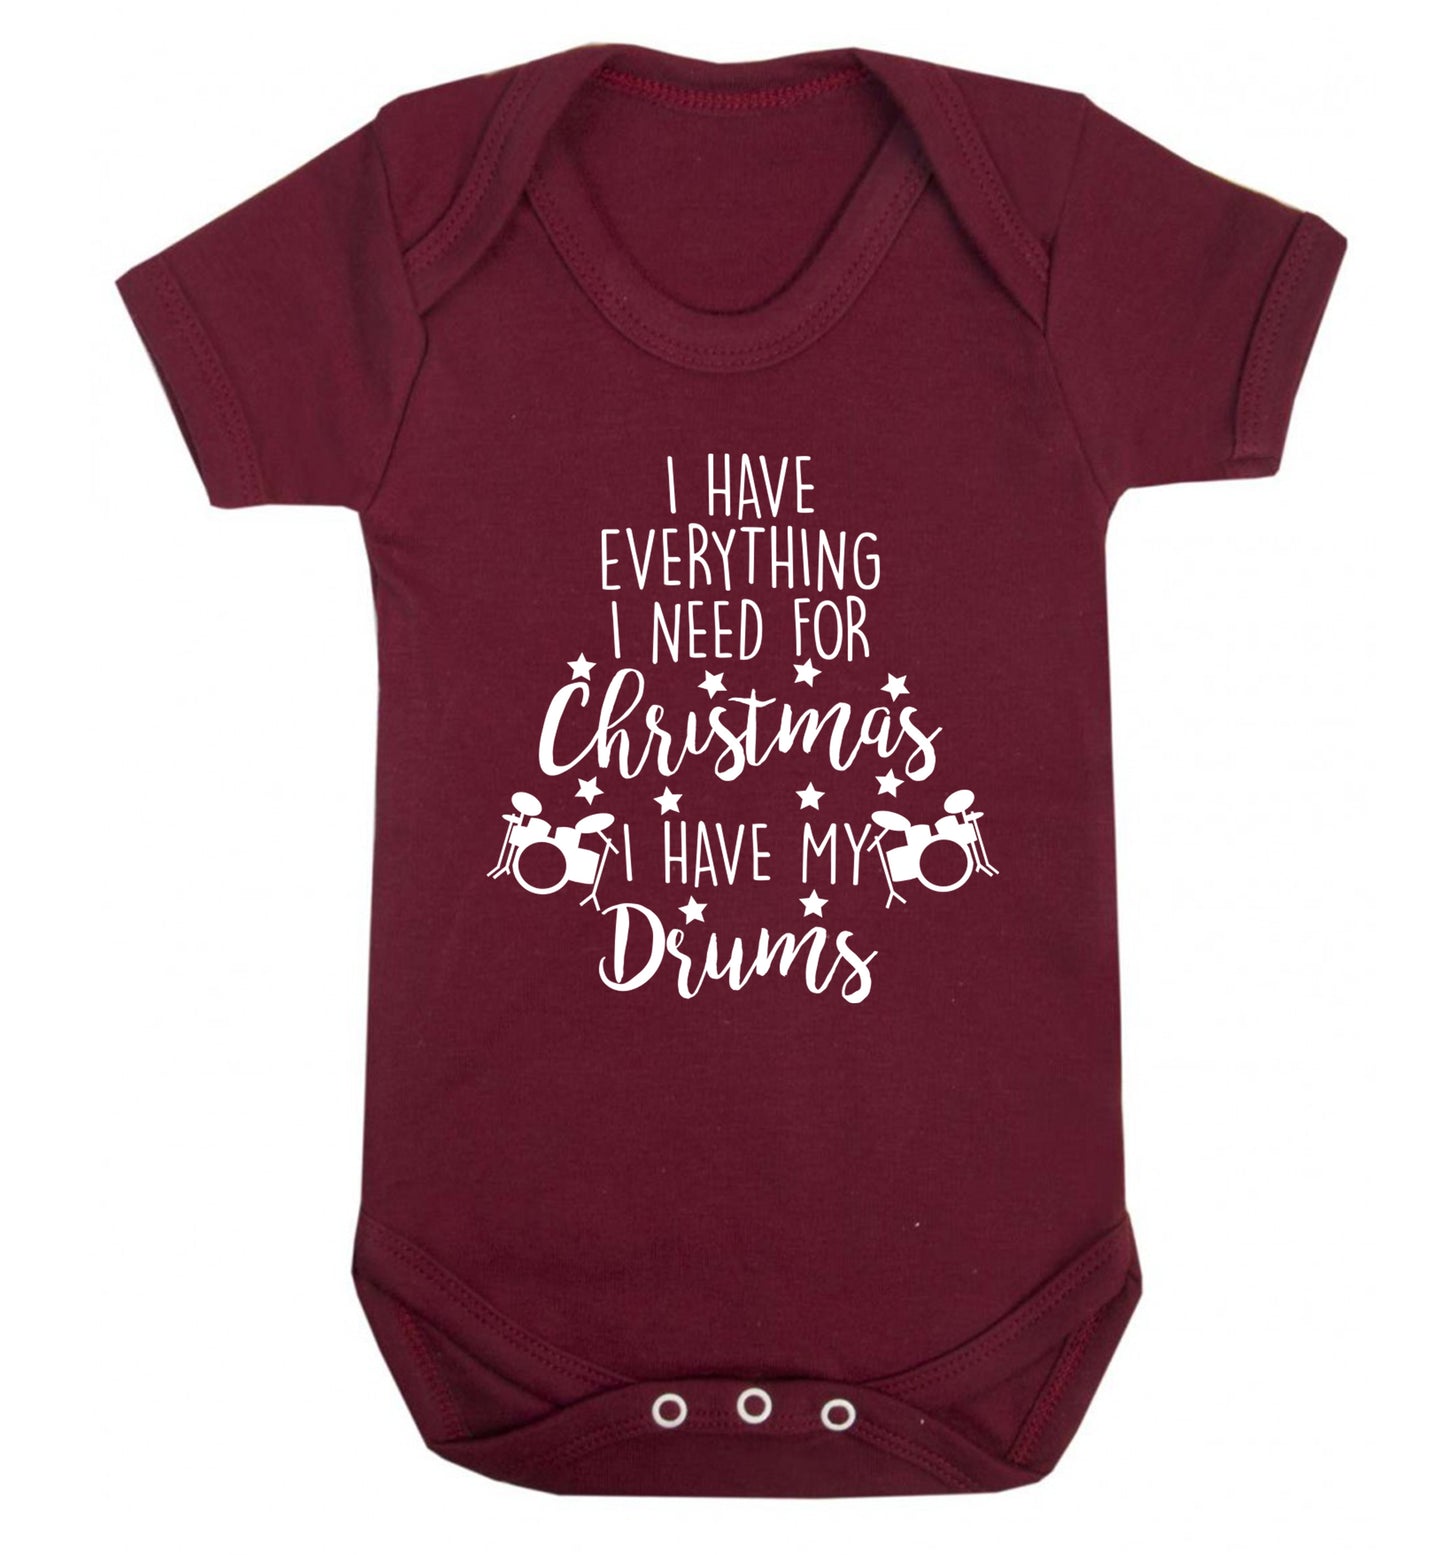 I have everything I need for Christmas I have my drums! Baby Vest maroon 18-24 months